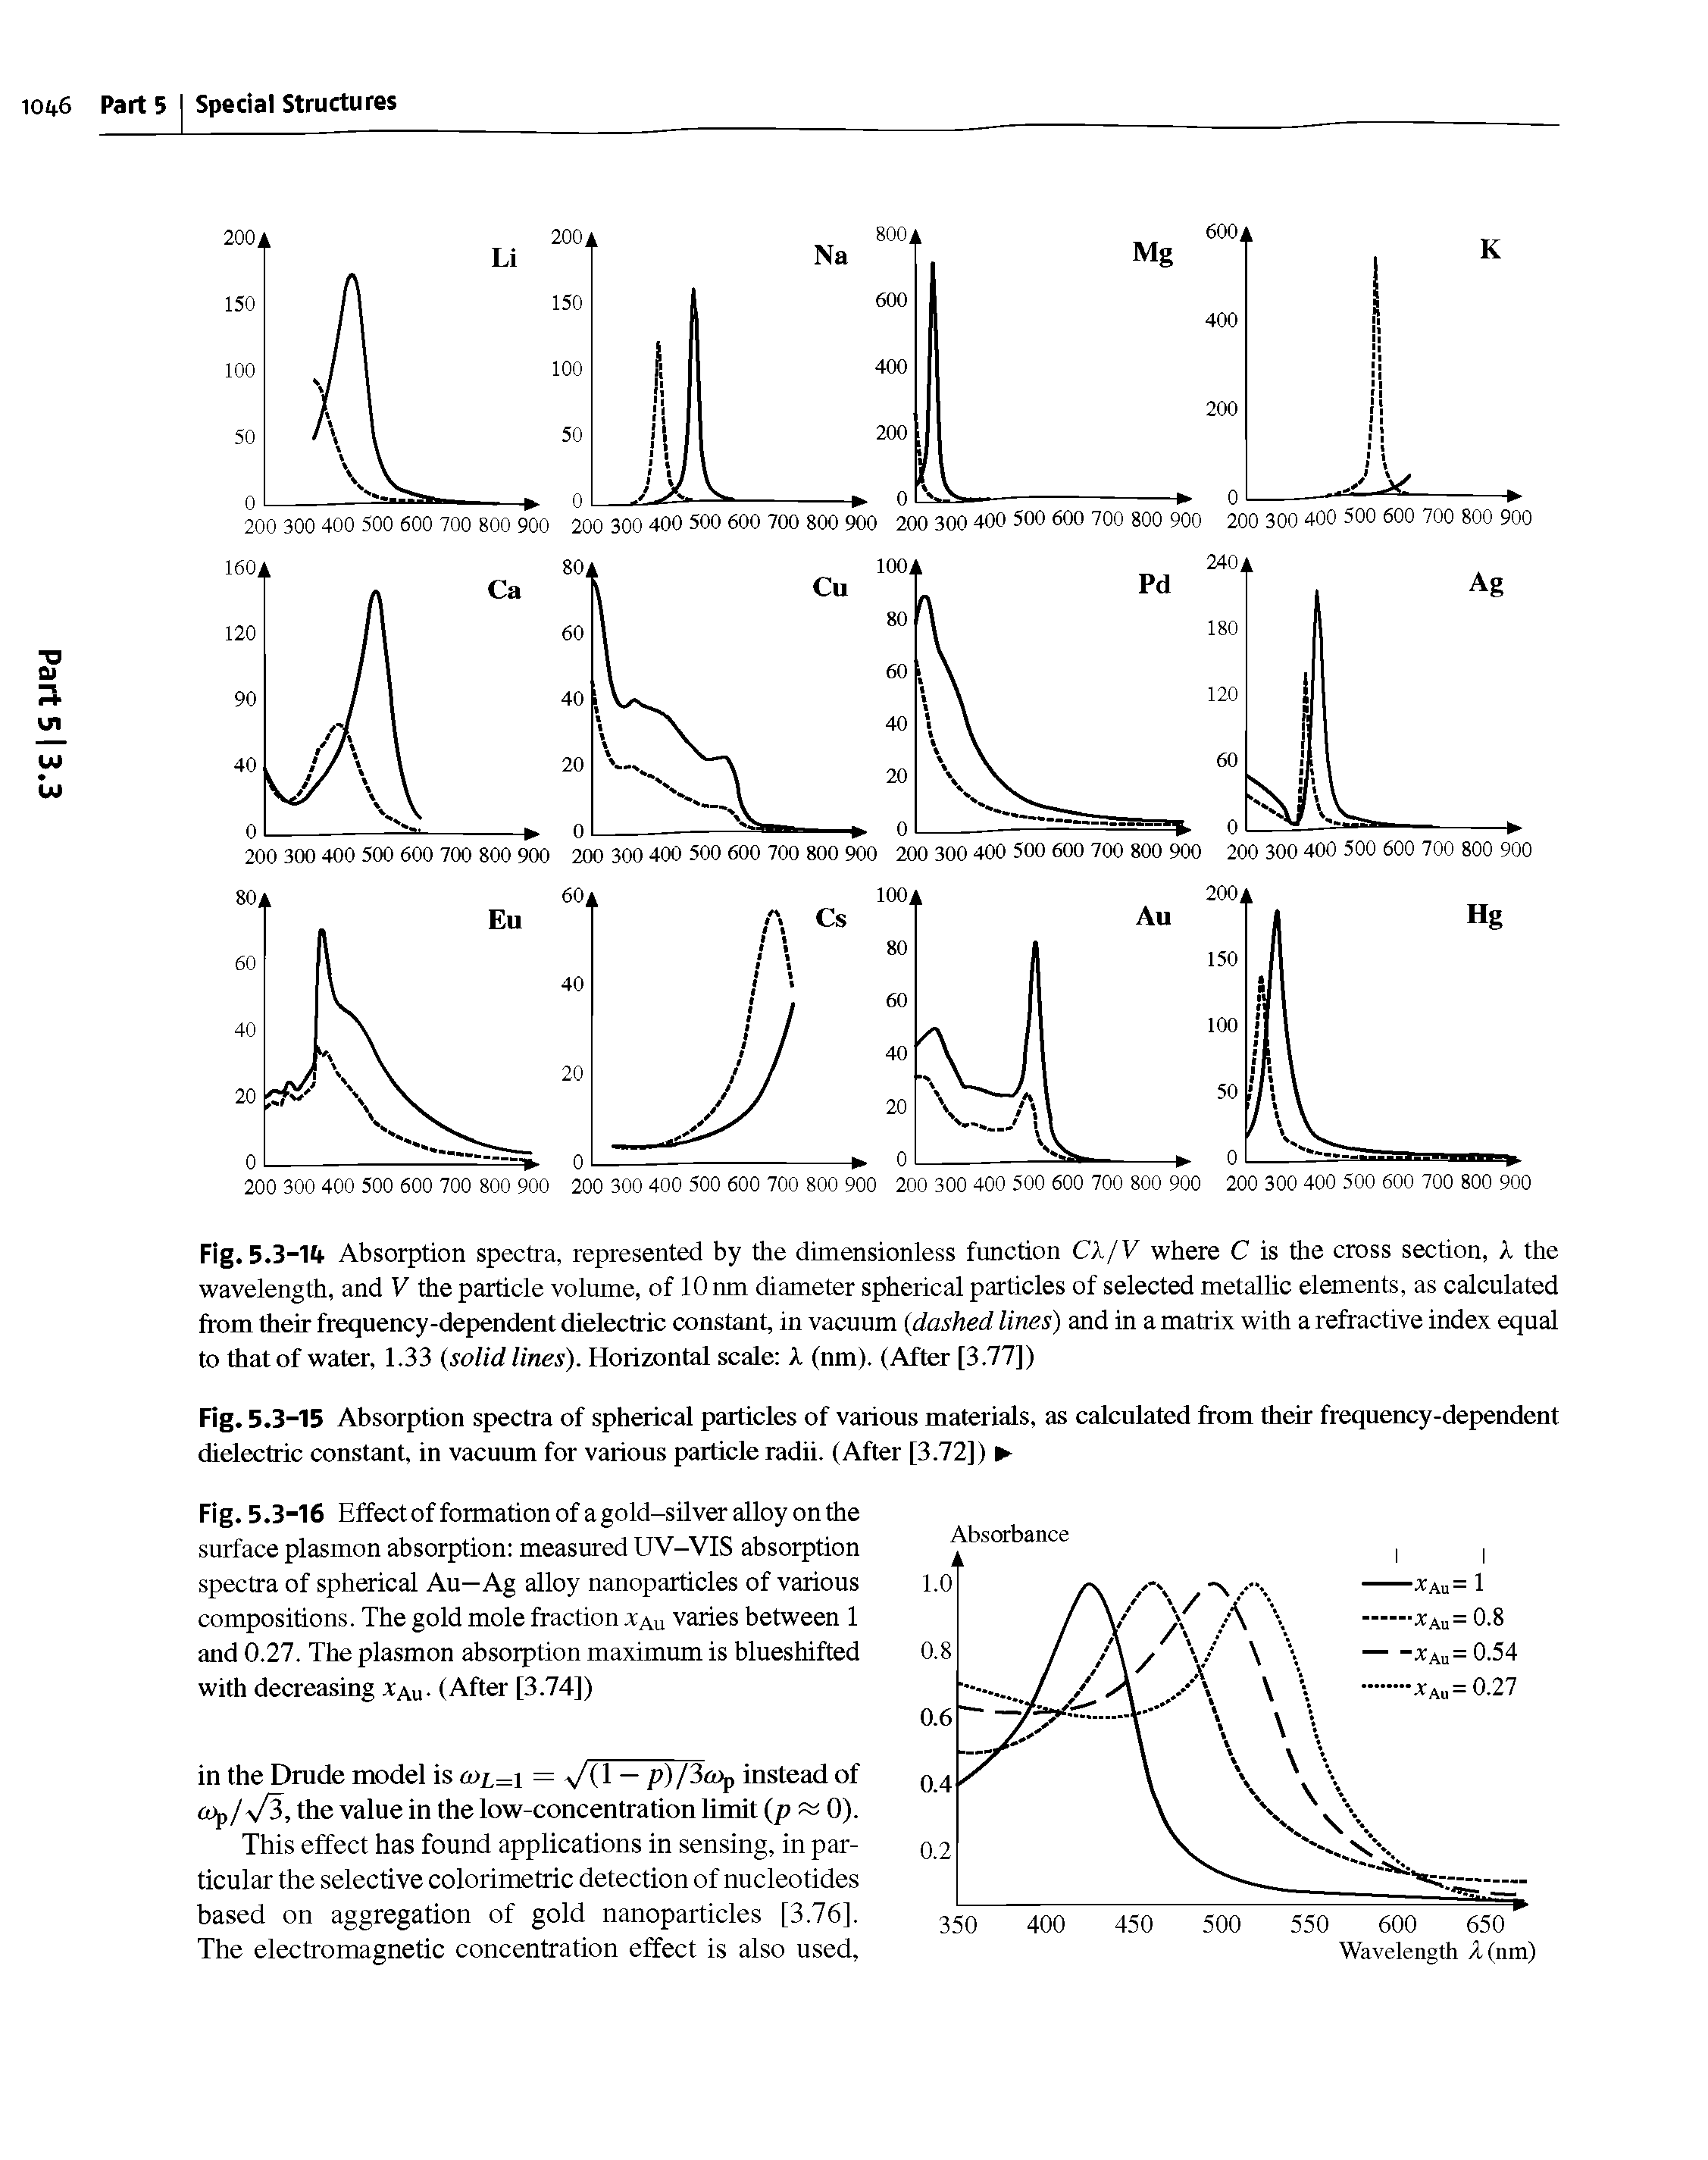 Fig. 5.3-16 Effect of formation of a gold-silver alloy on the surface plasmon absorption measured UV-VIS absorption spectra of spherical Au—Ag alloy nanoparticles of various compositions. The gold mole fraction xau varies between 1 and 0.27. The plasmon absorption maximum is blueshifted with decreasing Xau- (After [3.74])...